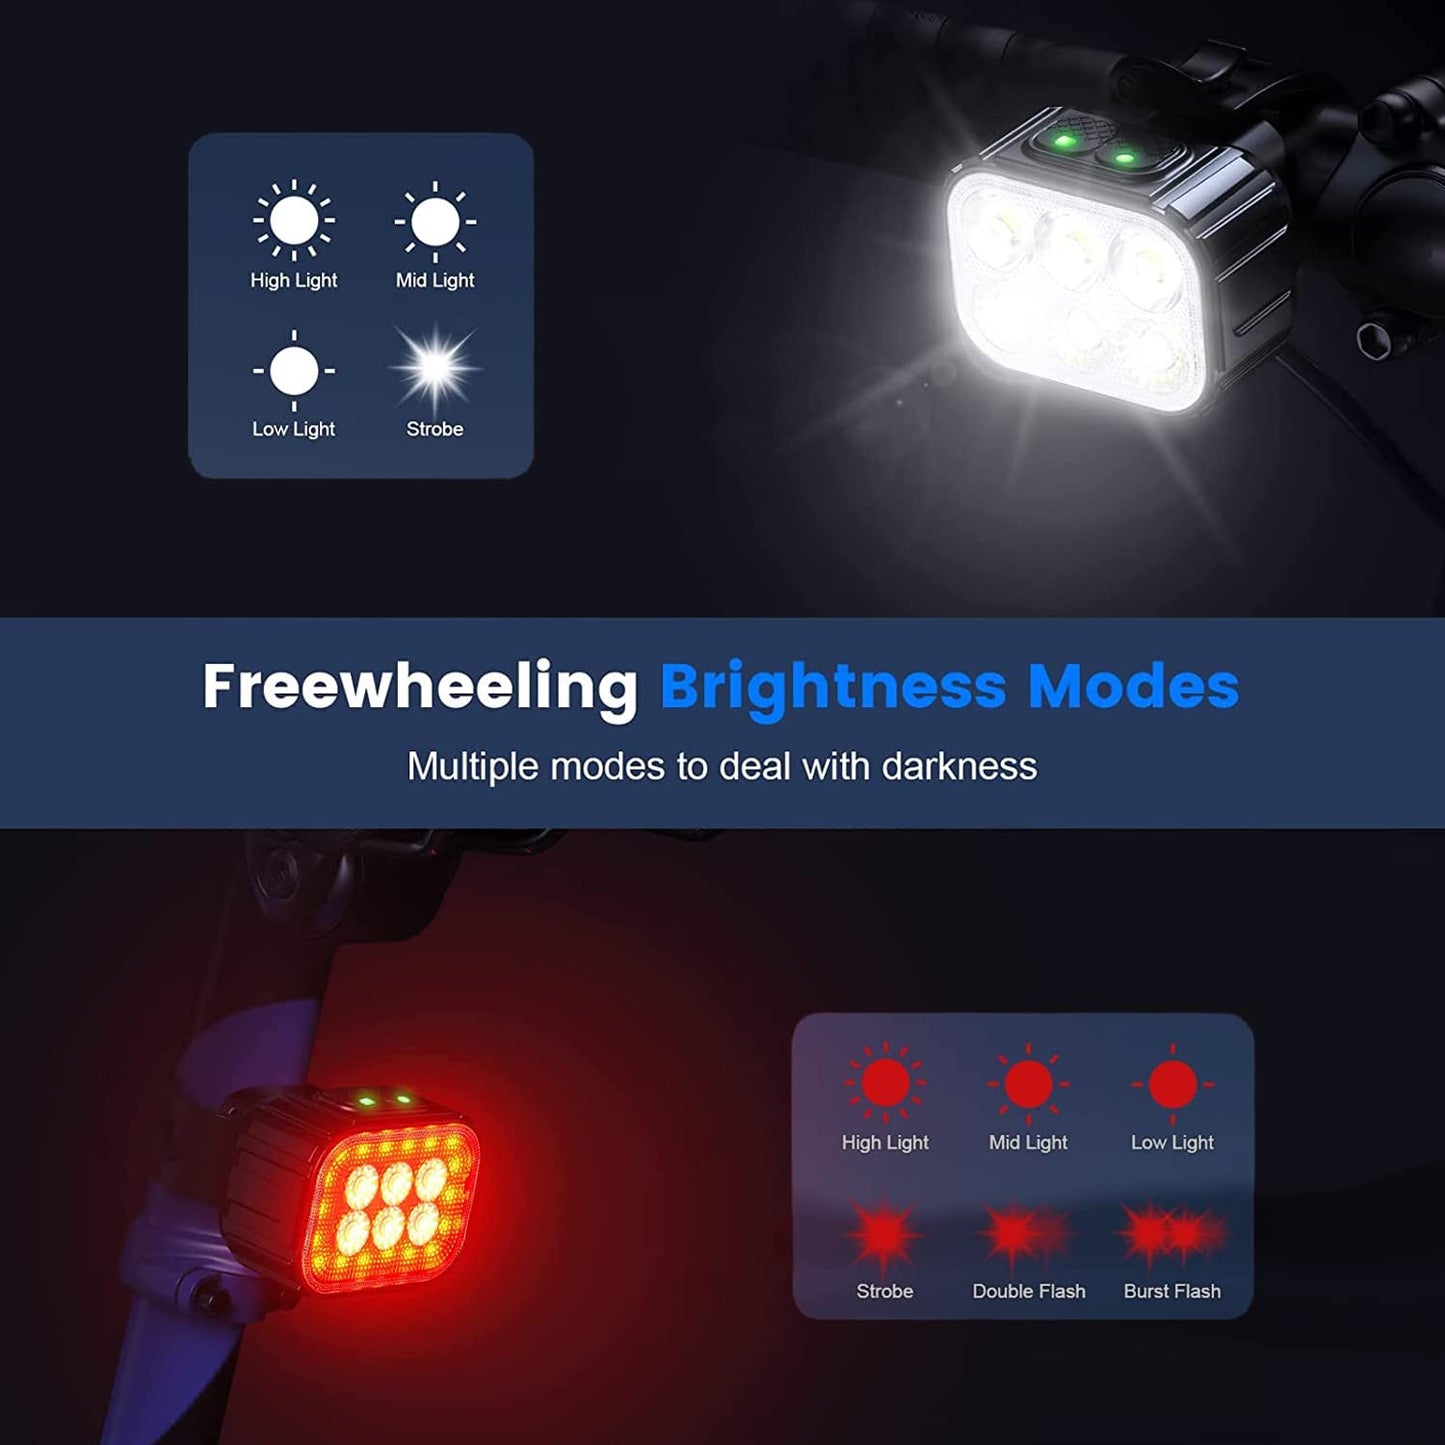 Bike Lights Set Ultra Bright, Bicycle Light Rechargeable with 6 Spot & Flood Beams, IP65 Waterproof Bike Lights for Night Riding, DIY 4X4 + 6X6 Lightning Modes Bike Headlight and Tail Light